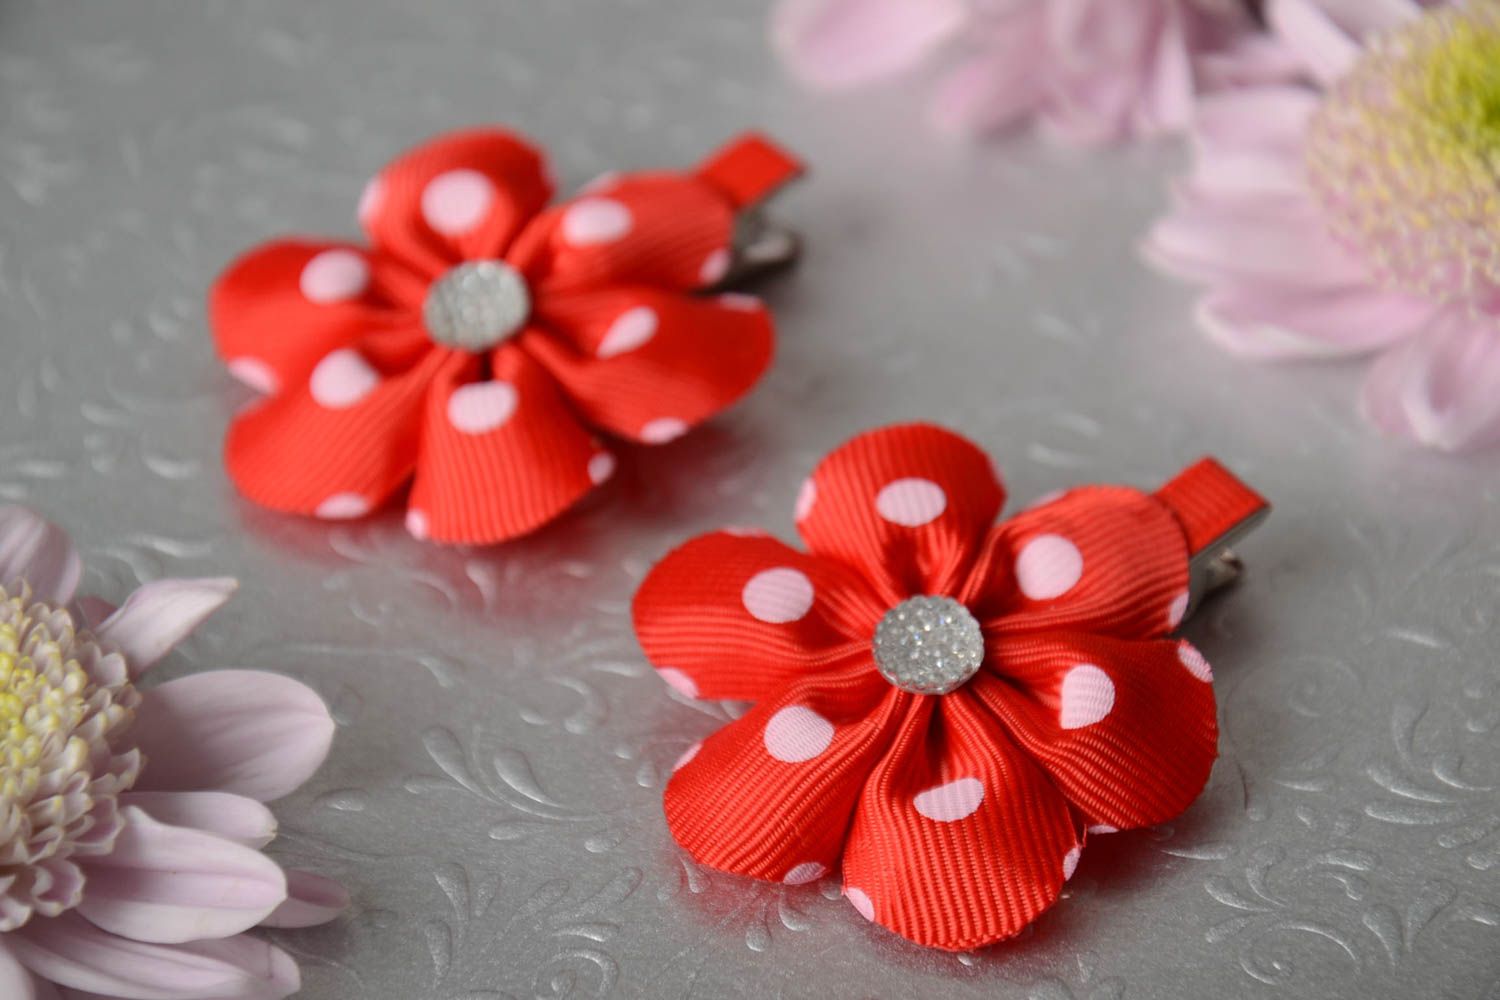 Handmade hair clips with red polka dot satin ribbon flowers set of 2 items photo 1